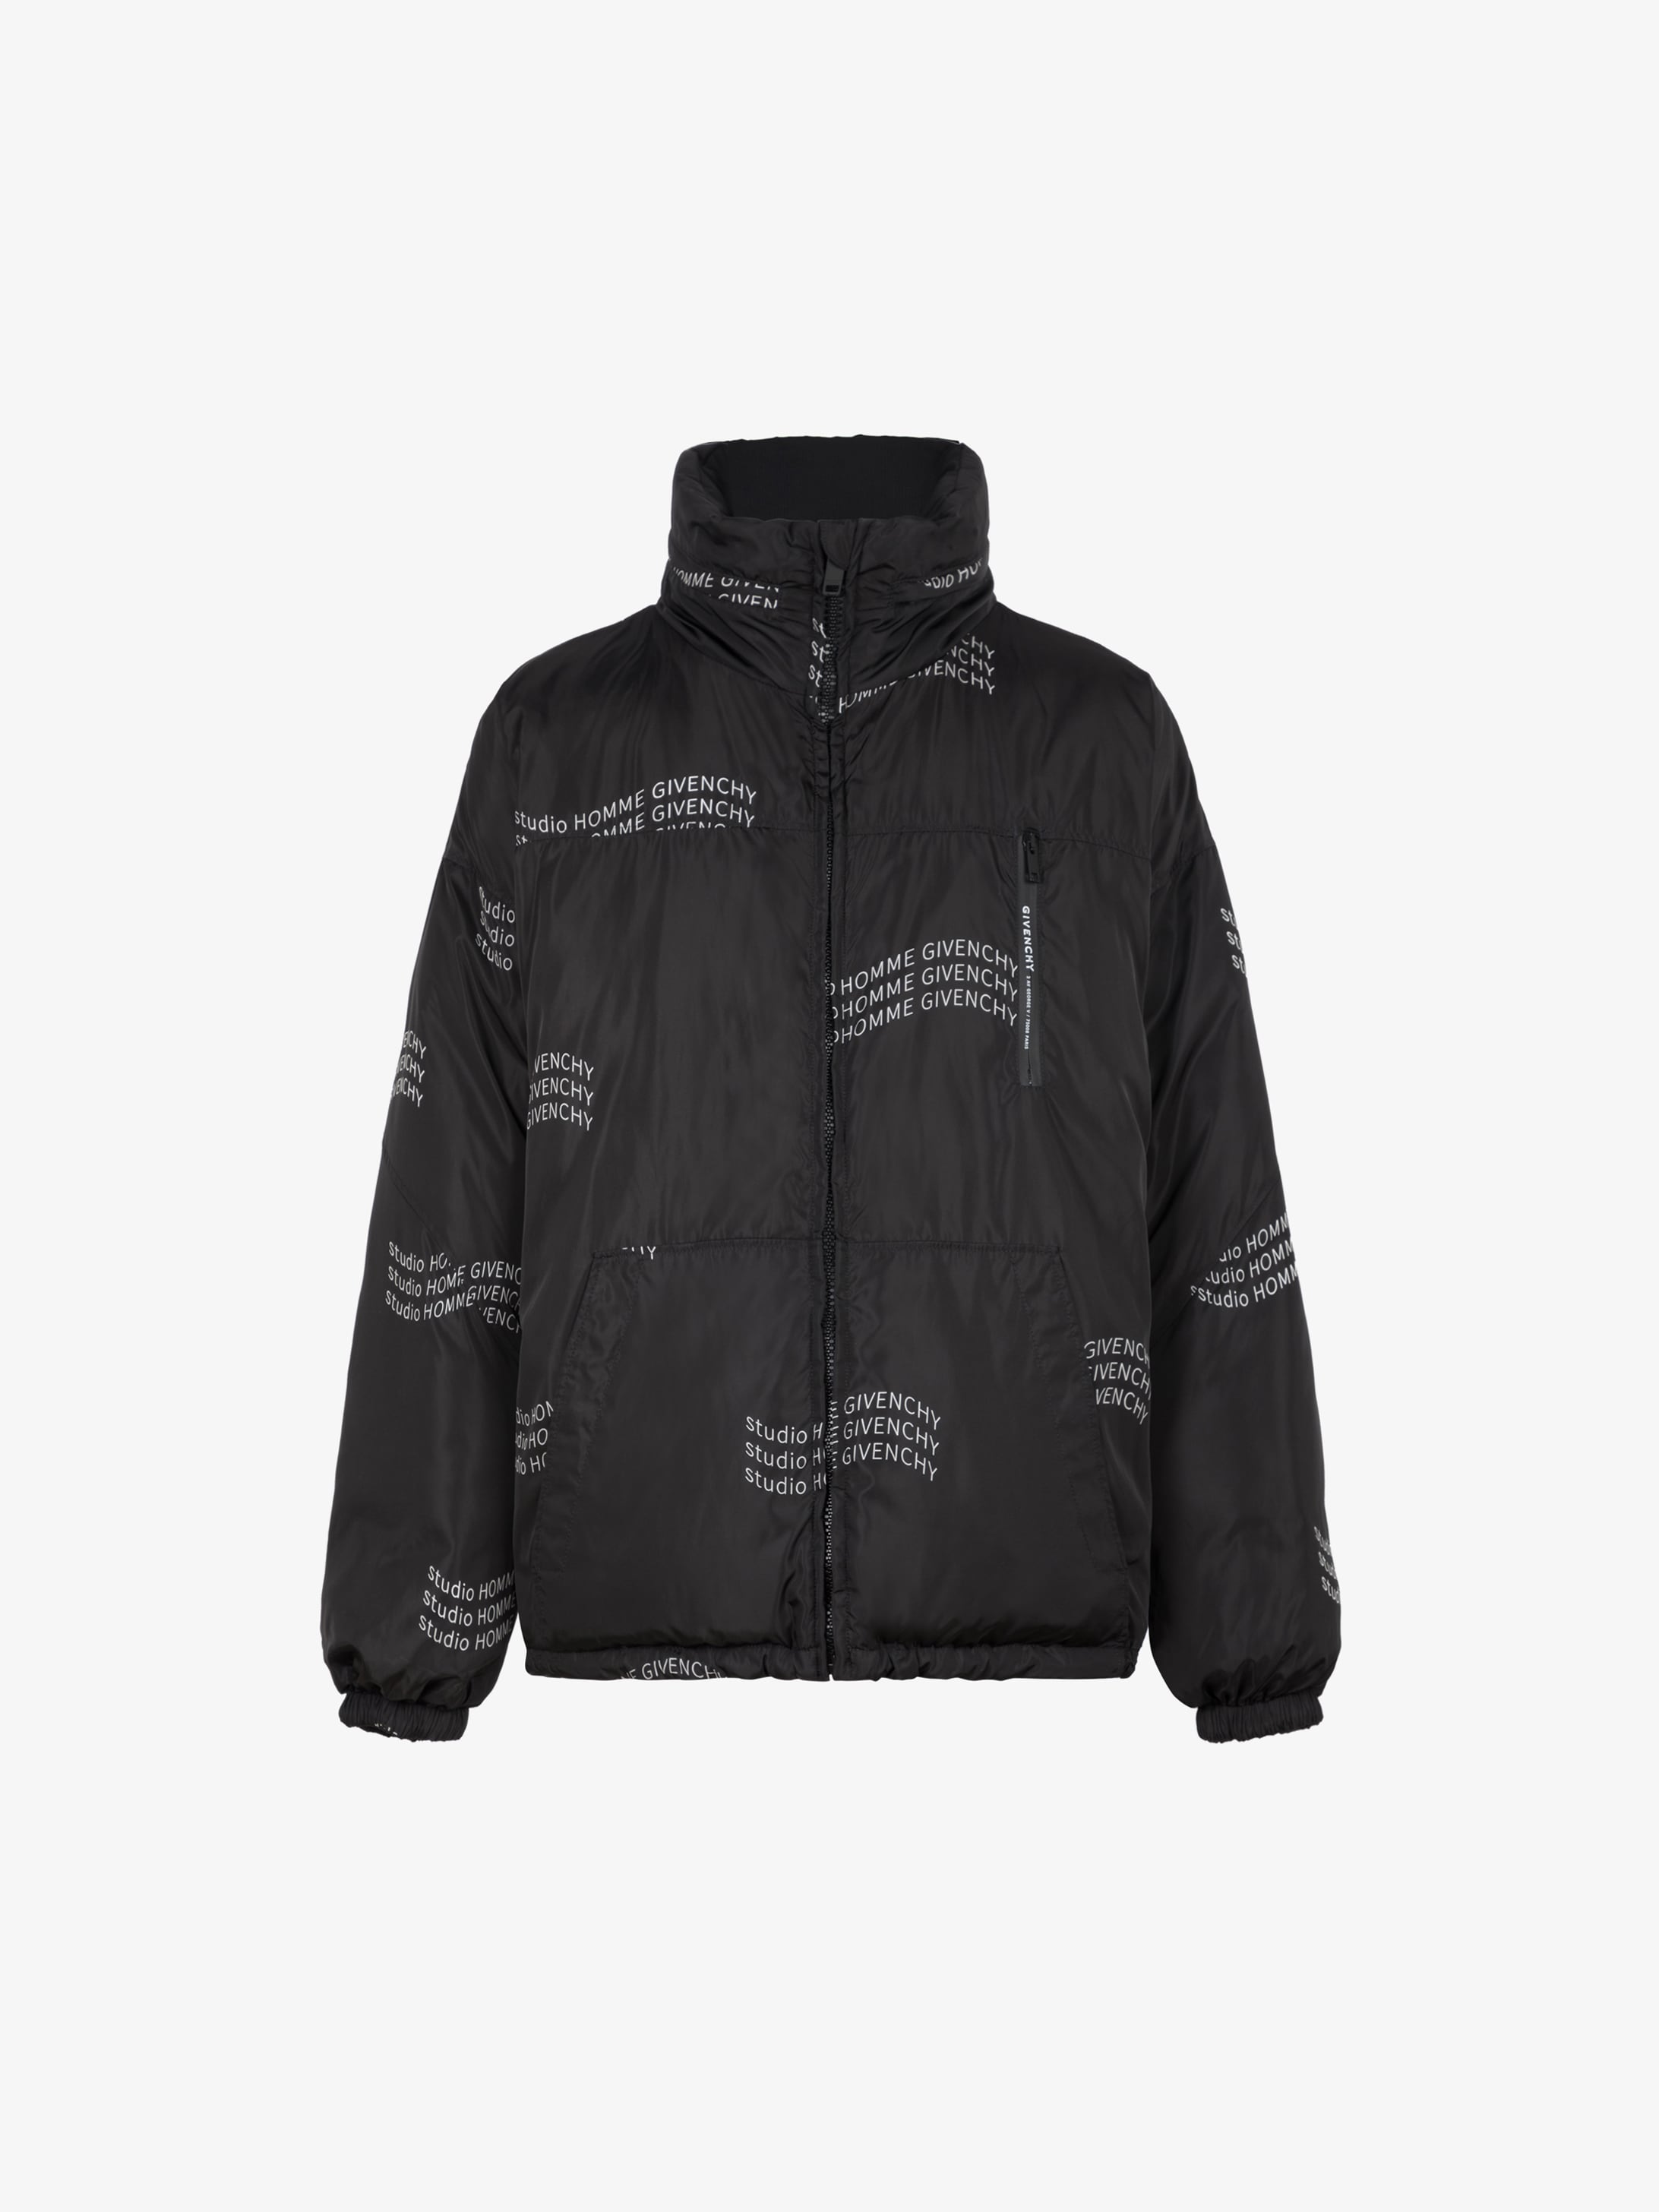 Jacket Givenchy Top Sellers, 53% OFF | www.ingeniovirtual.com